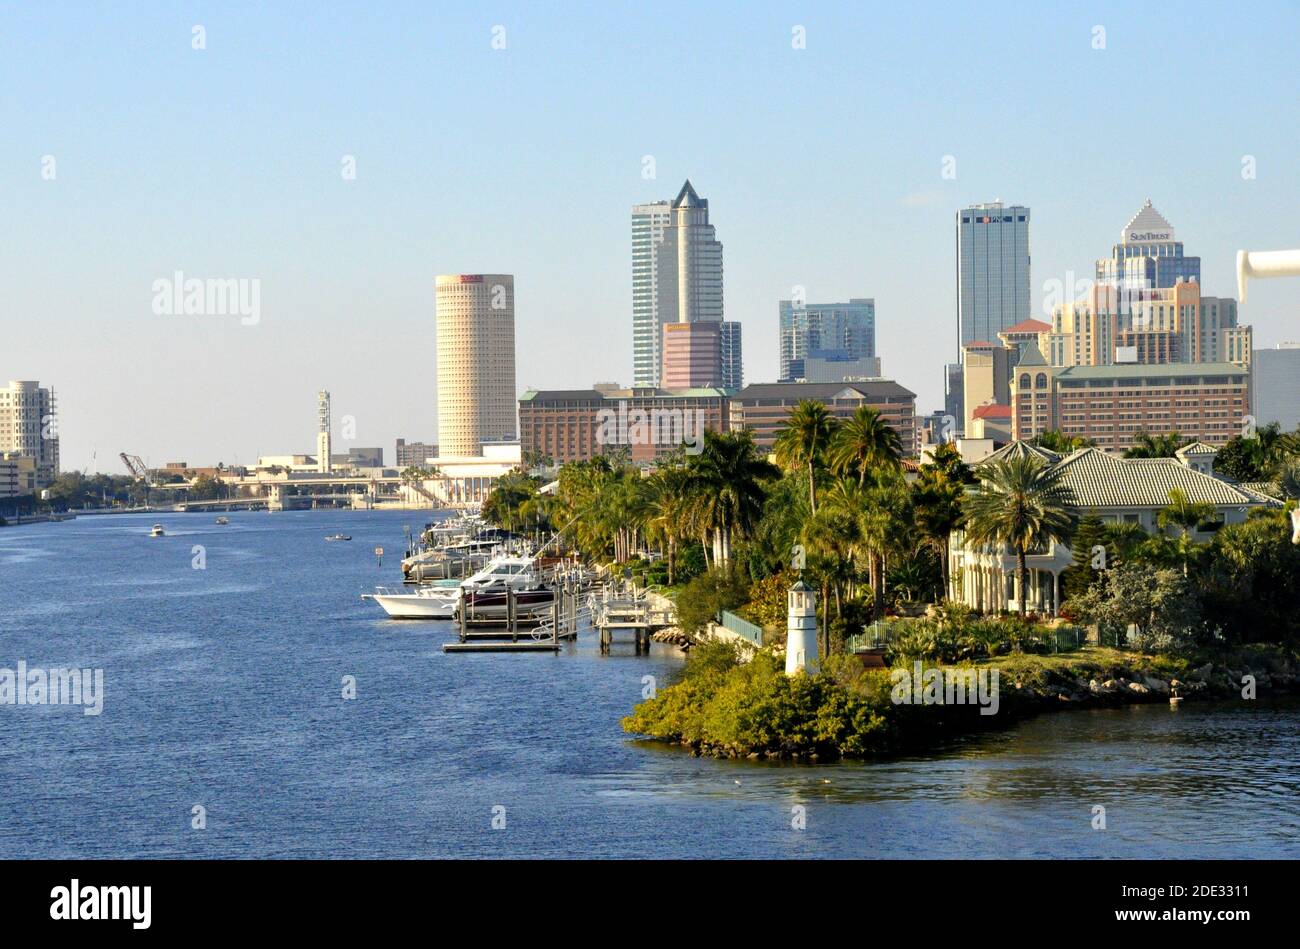 Tampa, Florida, U.S.A - September 22, 2015 - The view of the city and the residential area near the cruise port Stock Photo